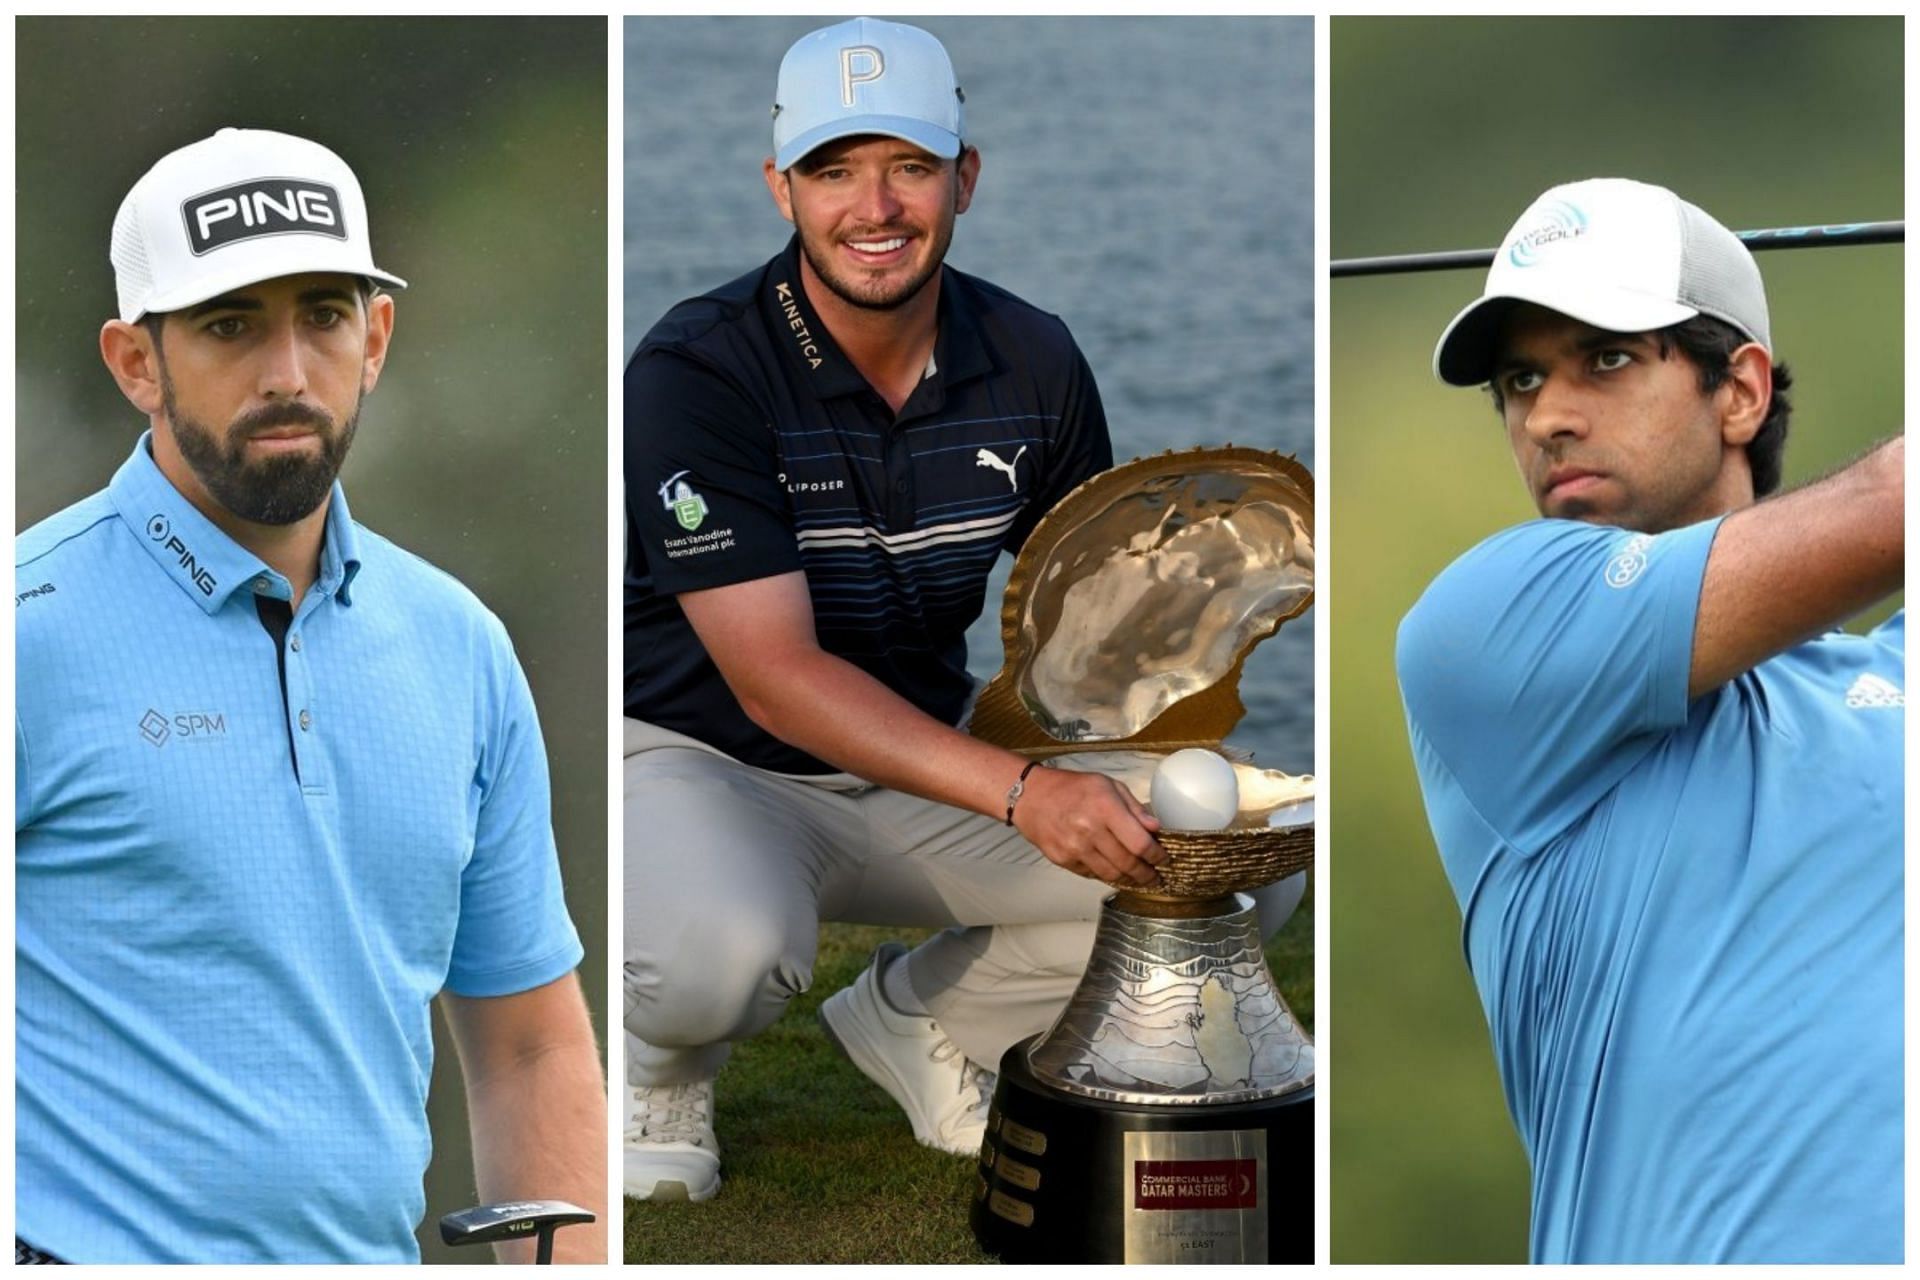 Matthieu Pavon, Ewen Ferguson and Aaron Rai are few of the golfers to watch out for at the Commercial Bank Qatar Open